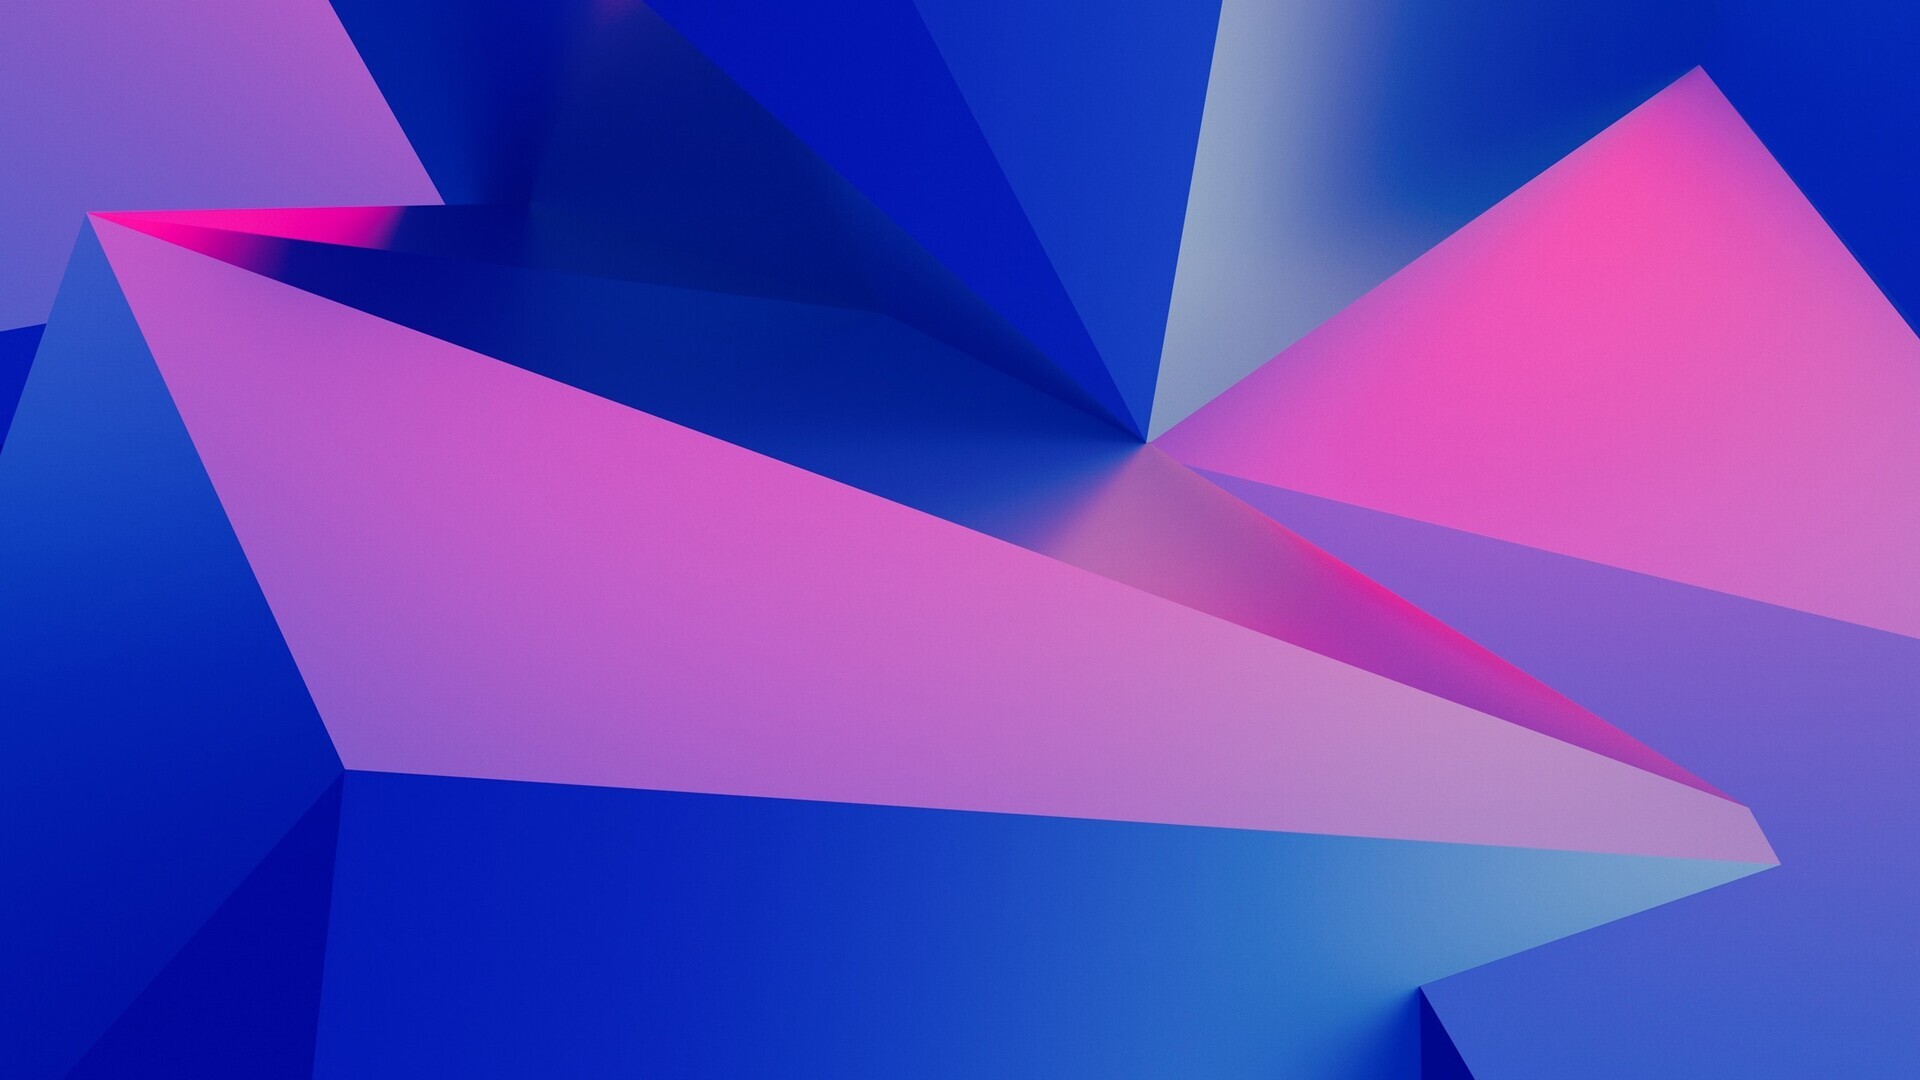 Geometric Abstract: Three-dimensional space, Complementary angles, Scalene triangles. 1920x1080 Full HD Wallpaper.